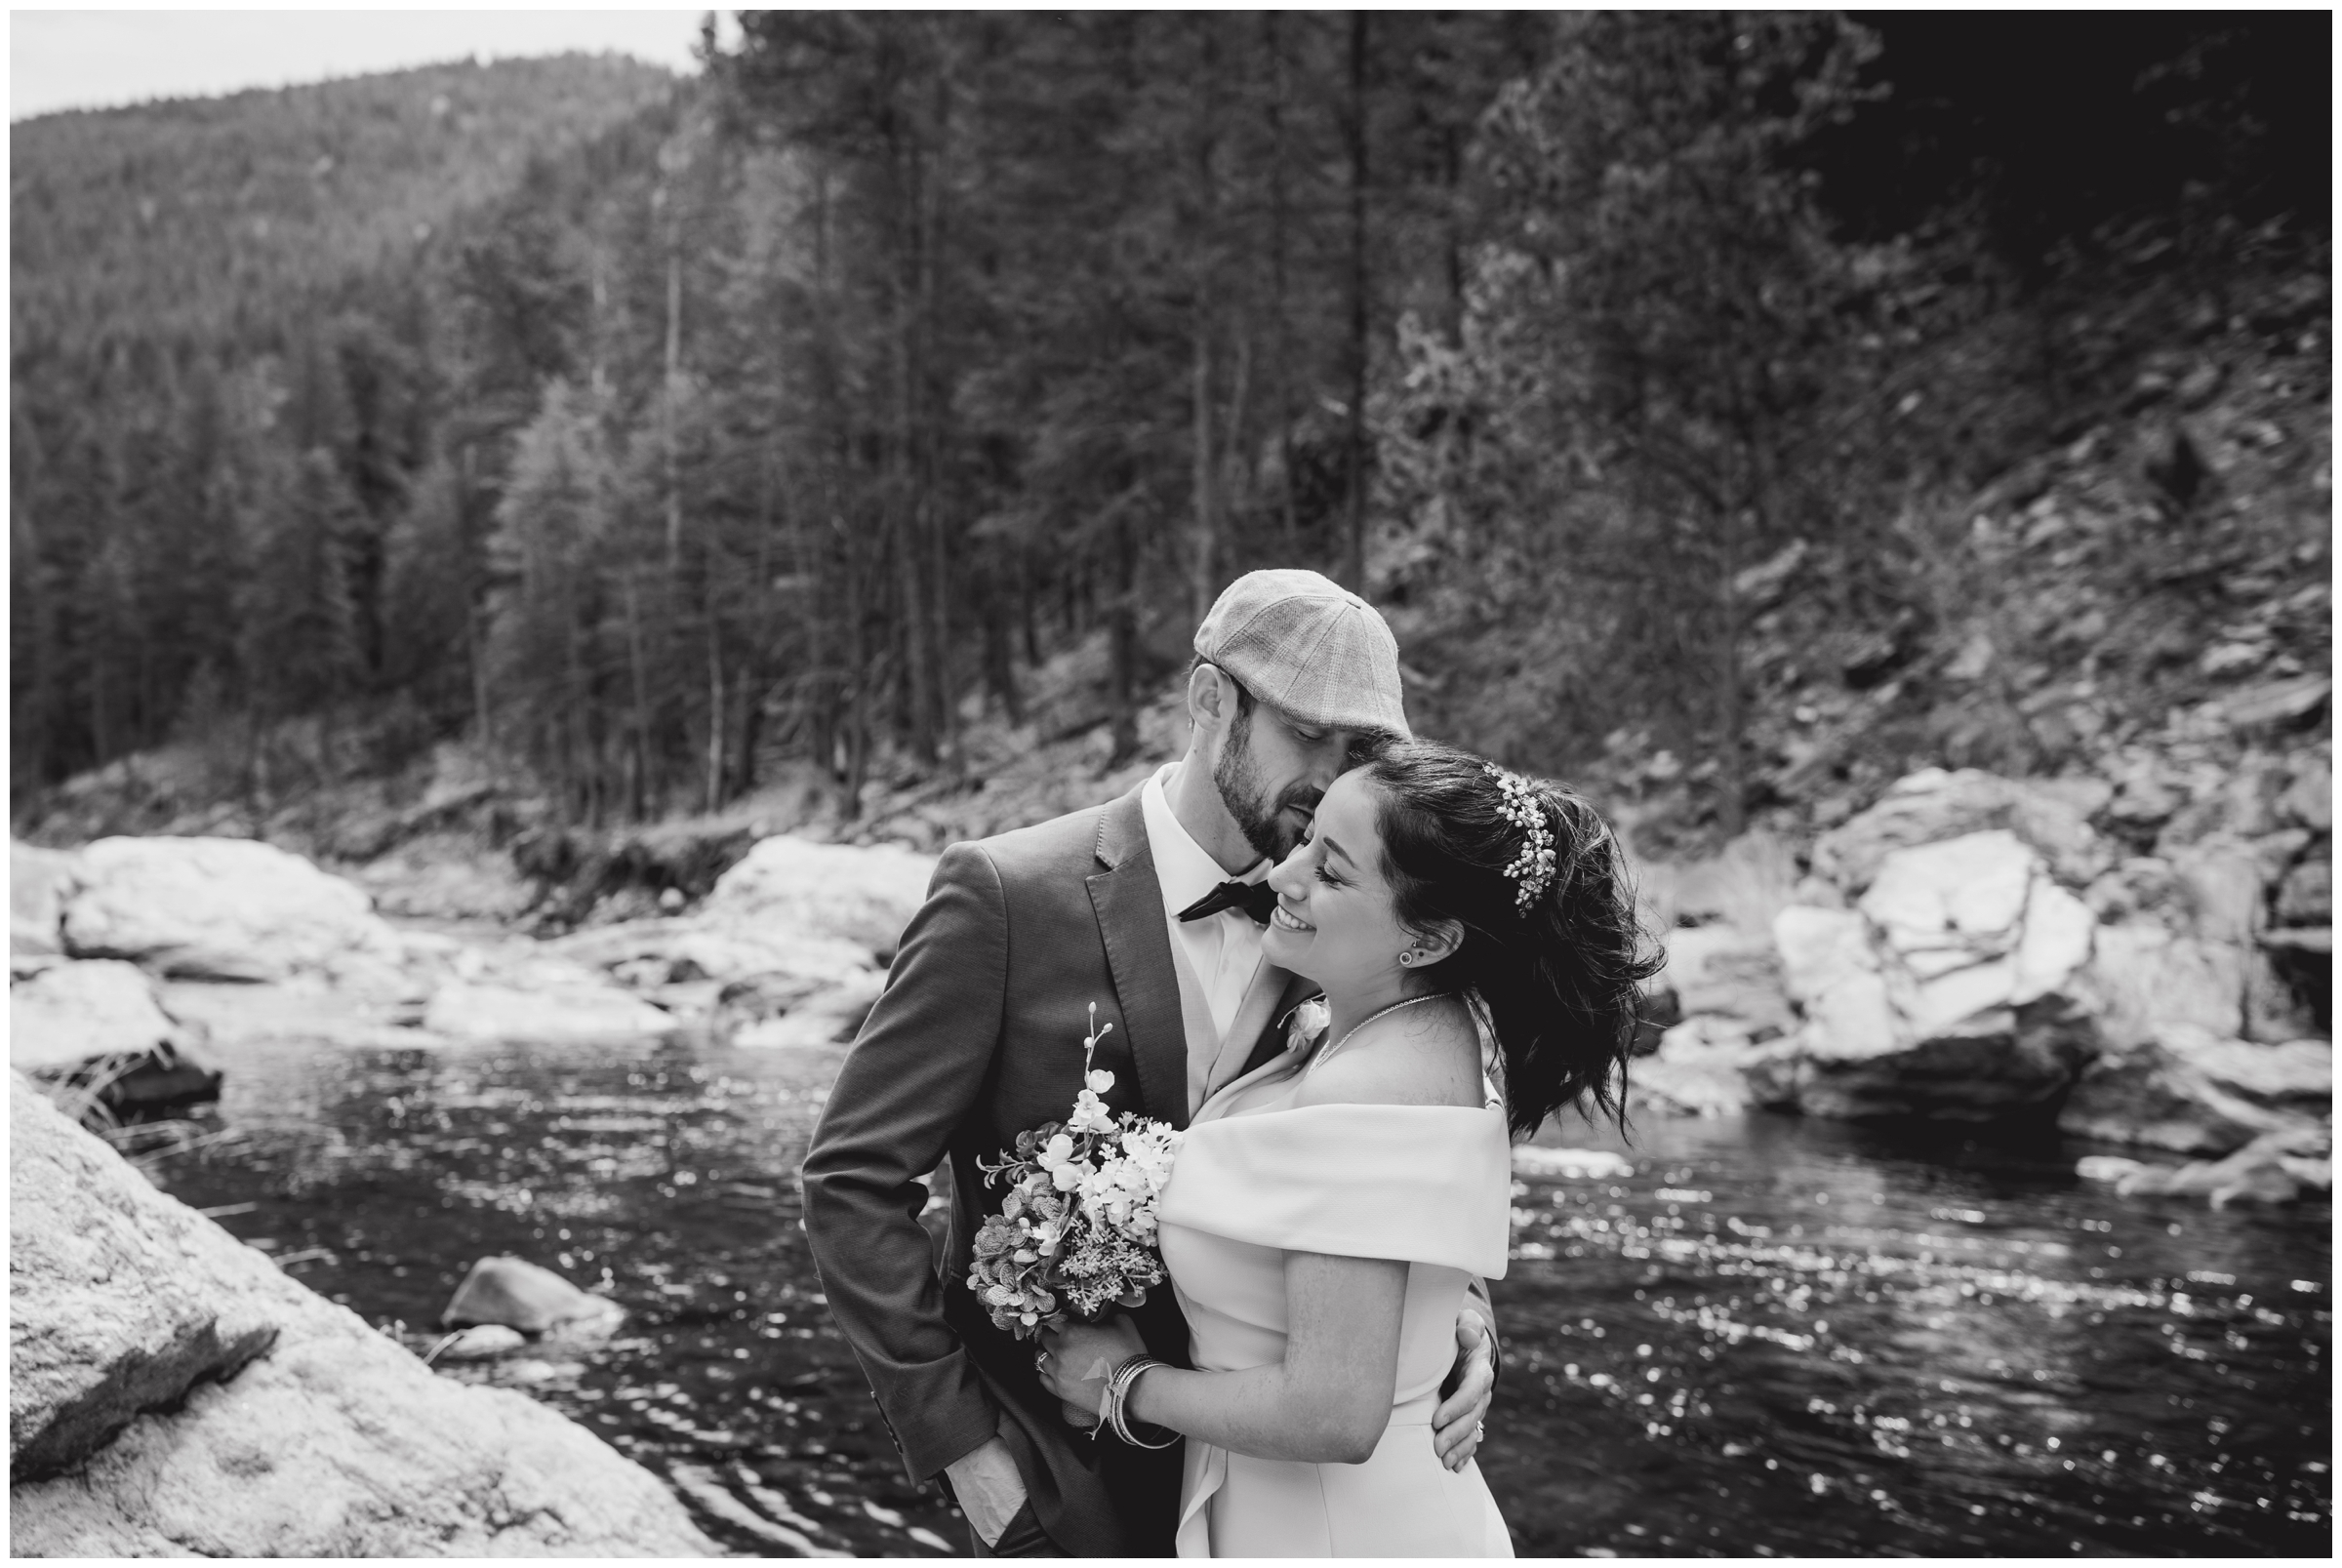 river elopement wedding inspiration in the CO mountains by Plum Pretty Photography 